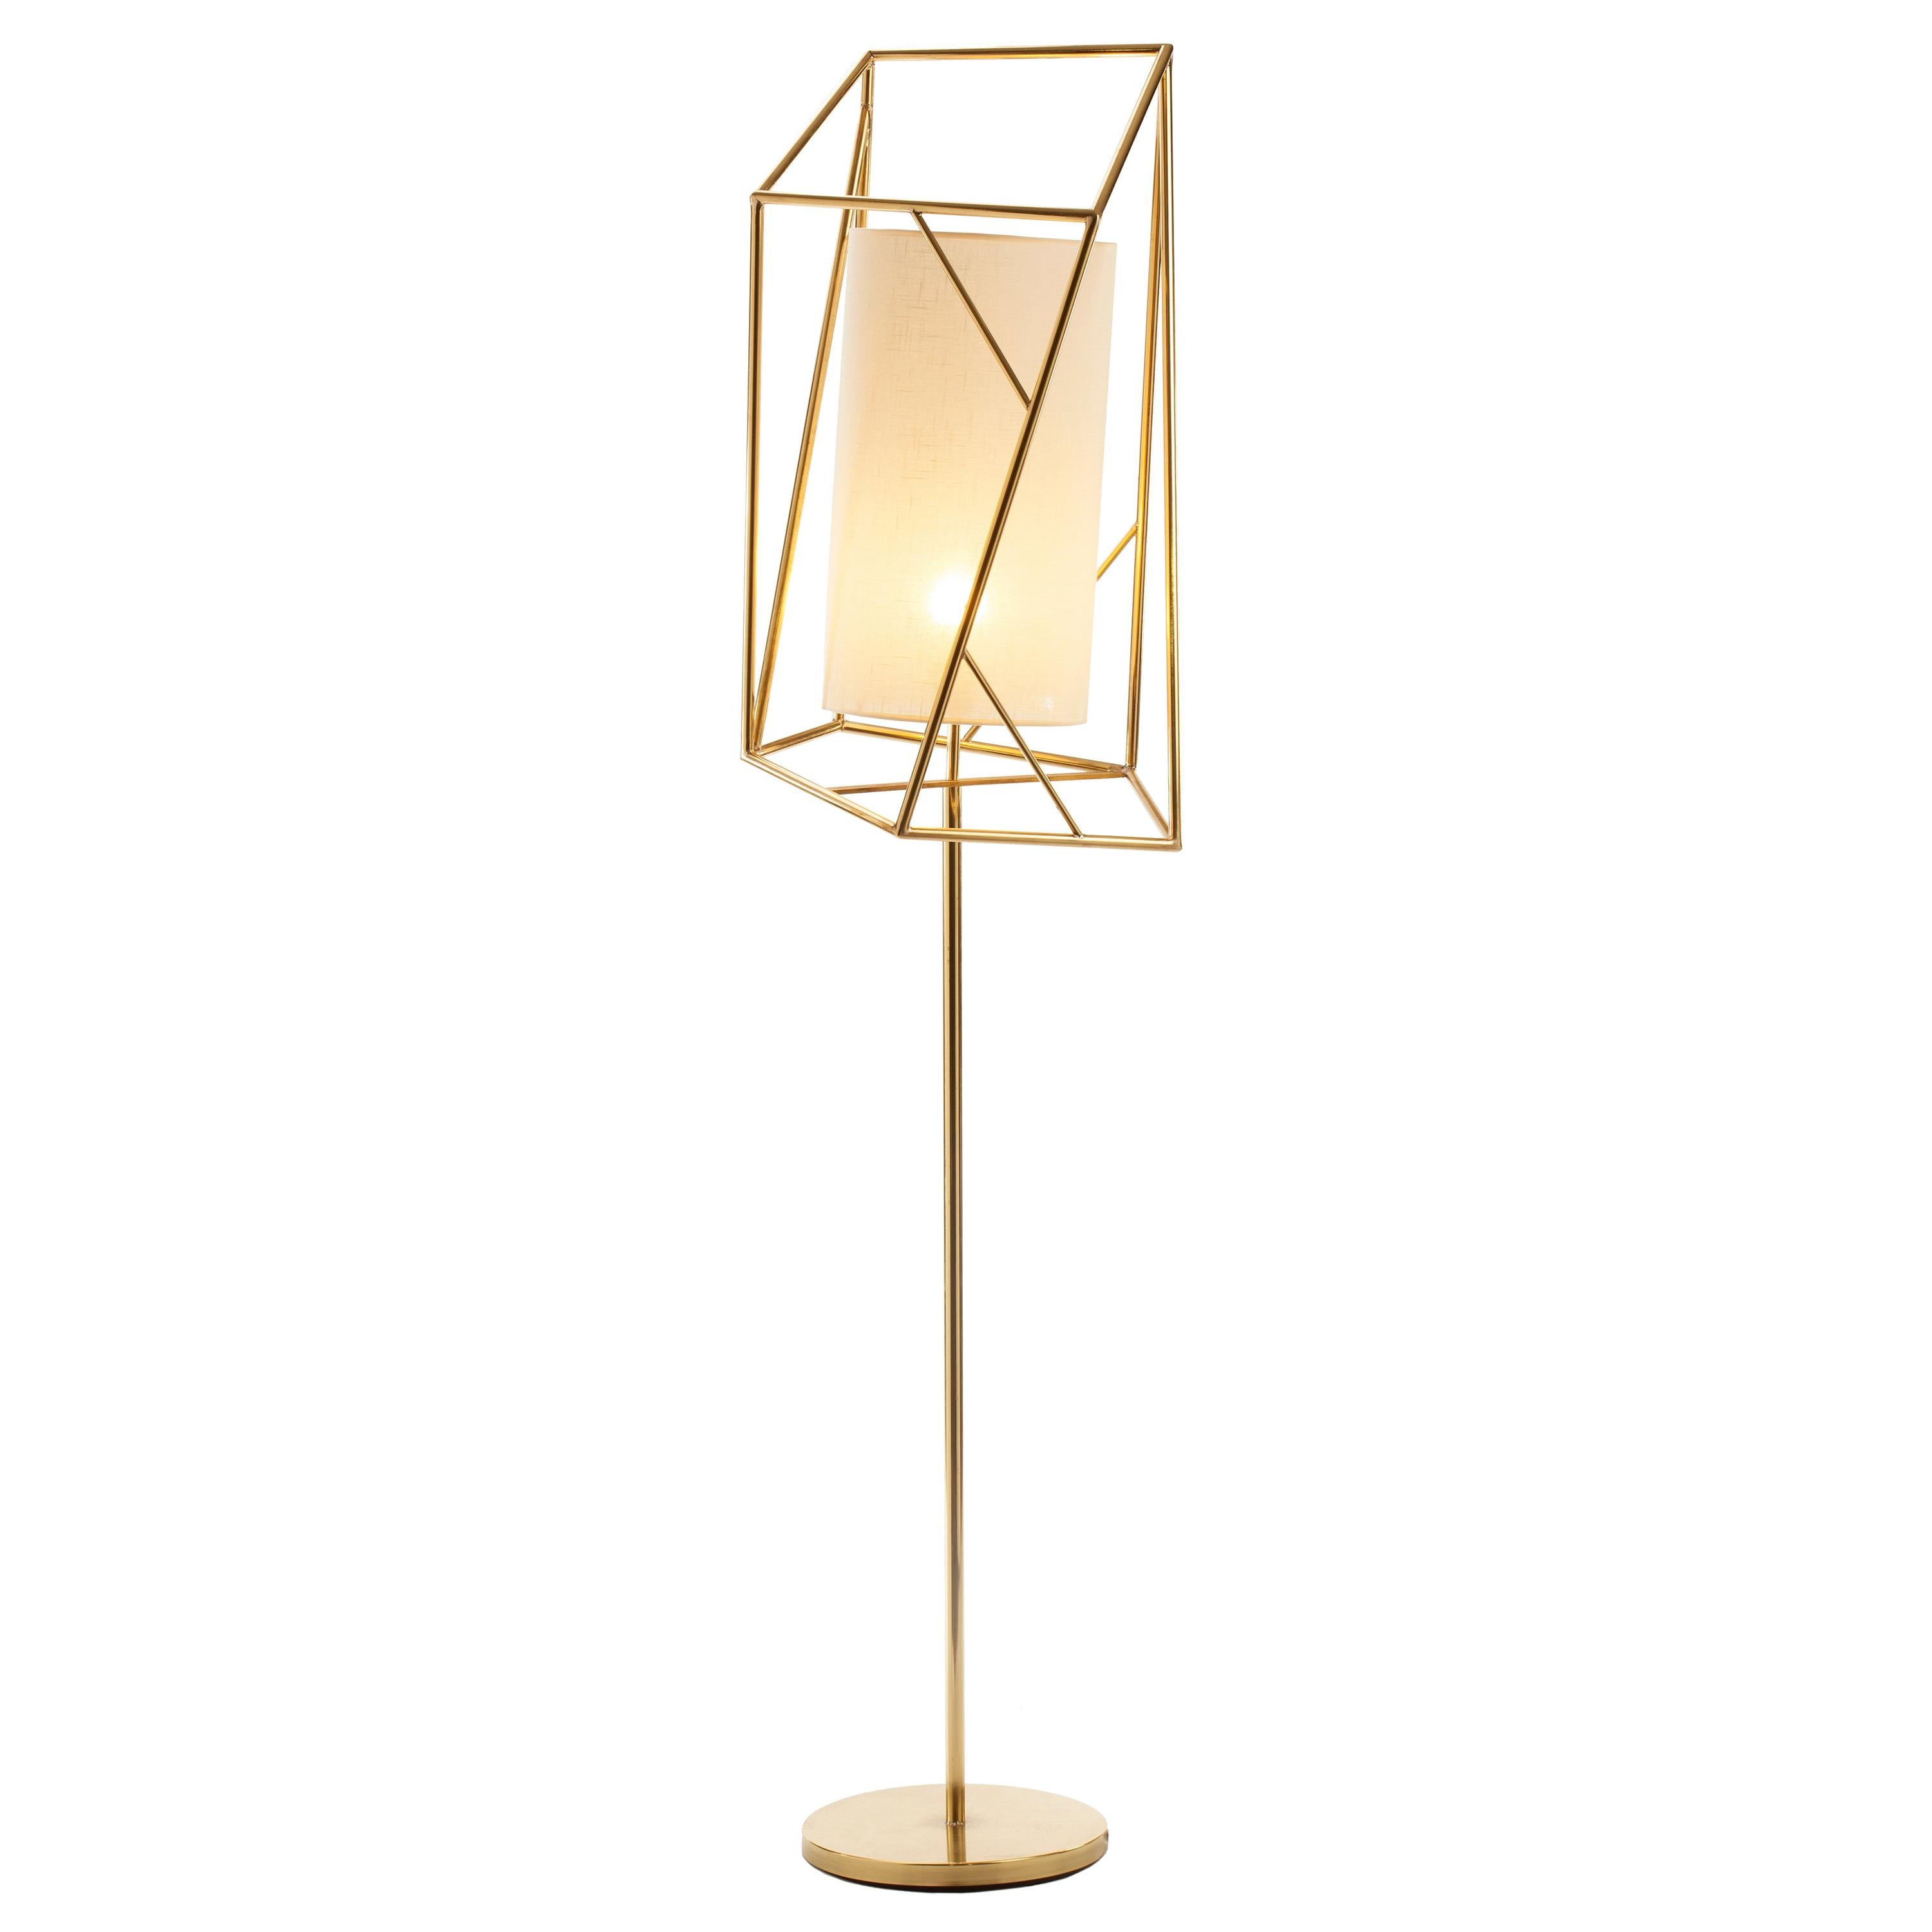 Art Deco Inspired Star Floor Lamp Polished Brass and Linen Shade